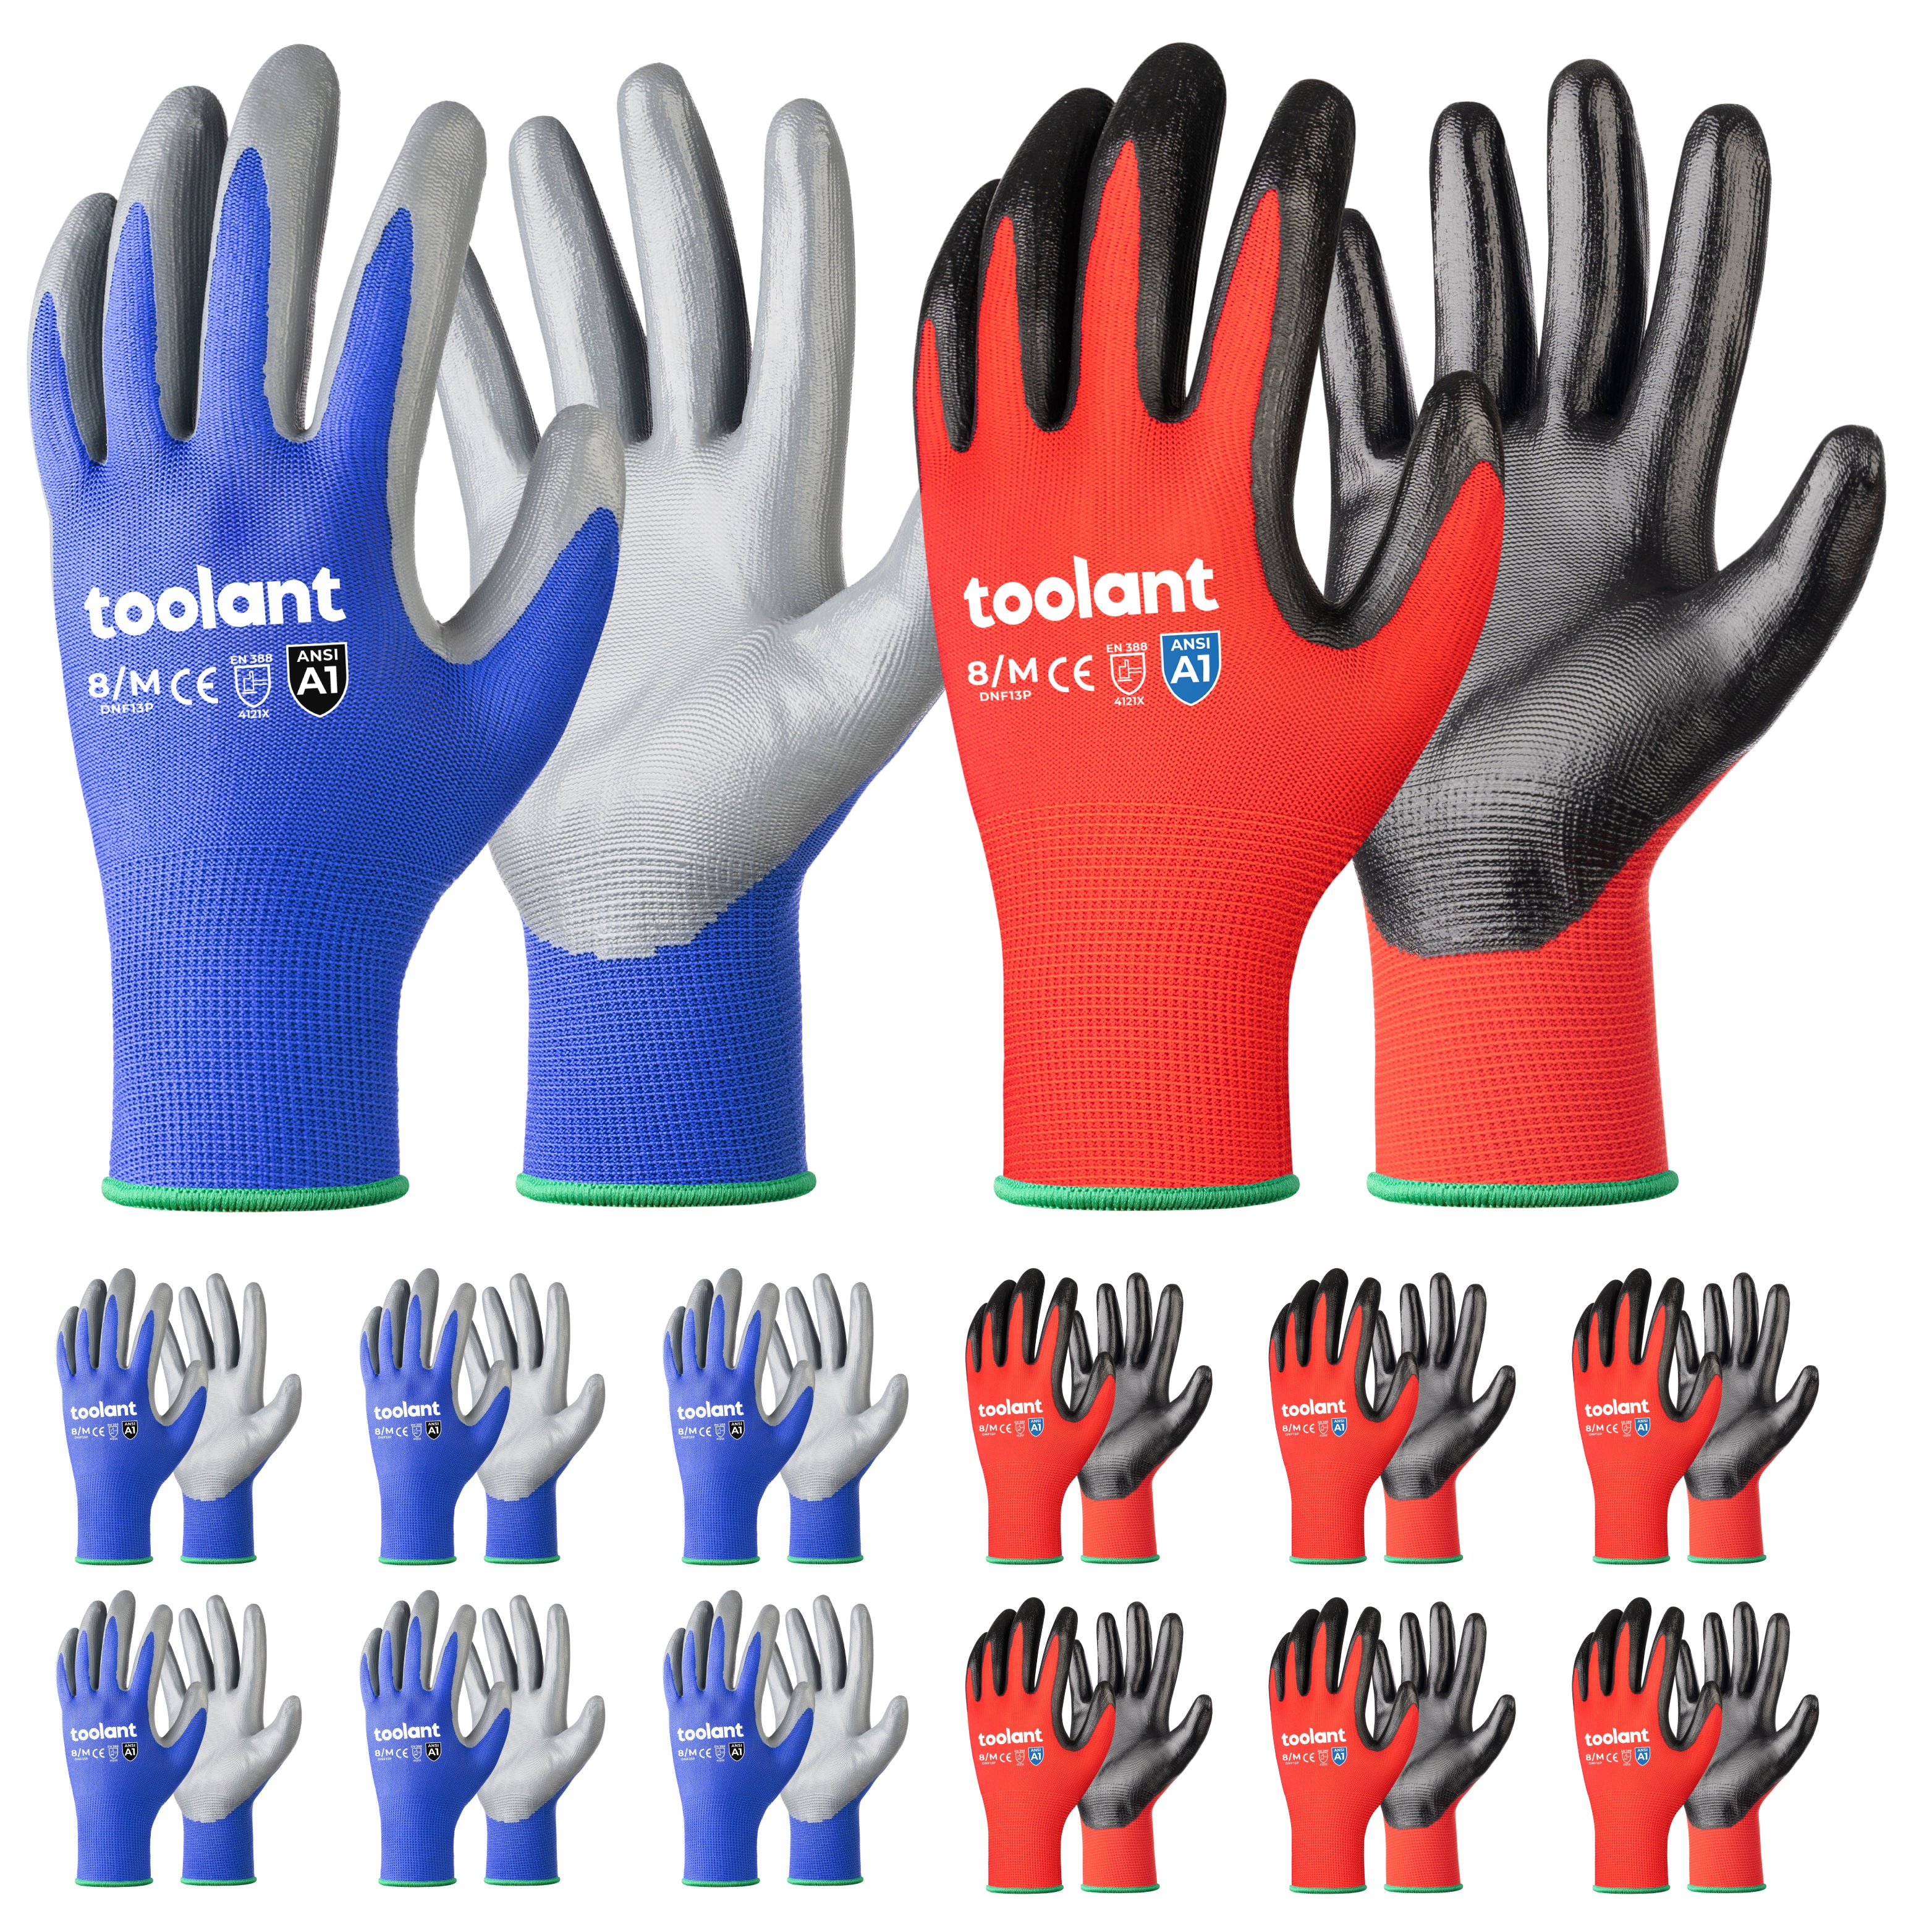 toolant Work Gloves for Men 12 Pairs, Nitrile Work Gloves with